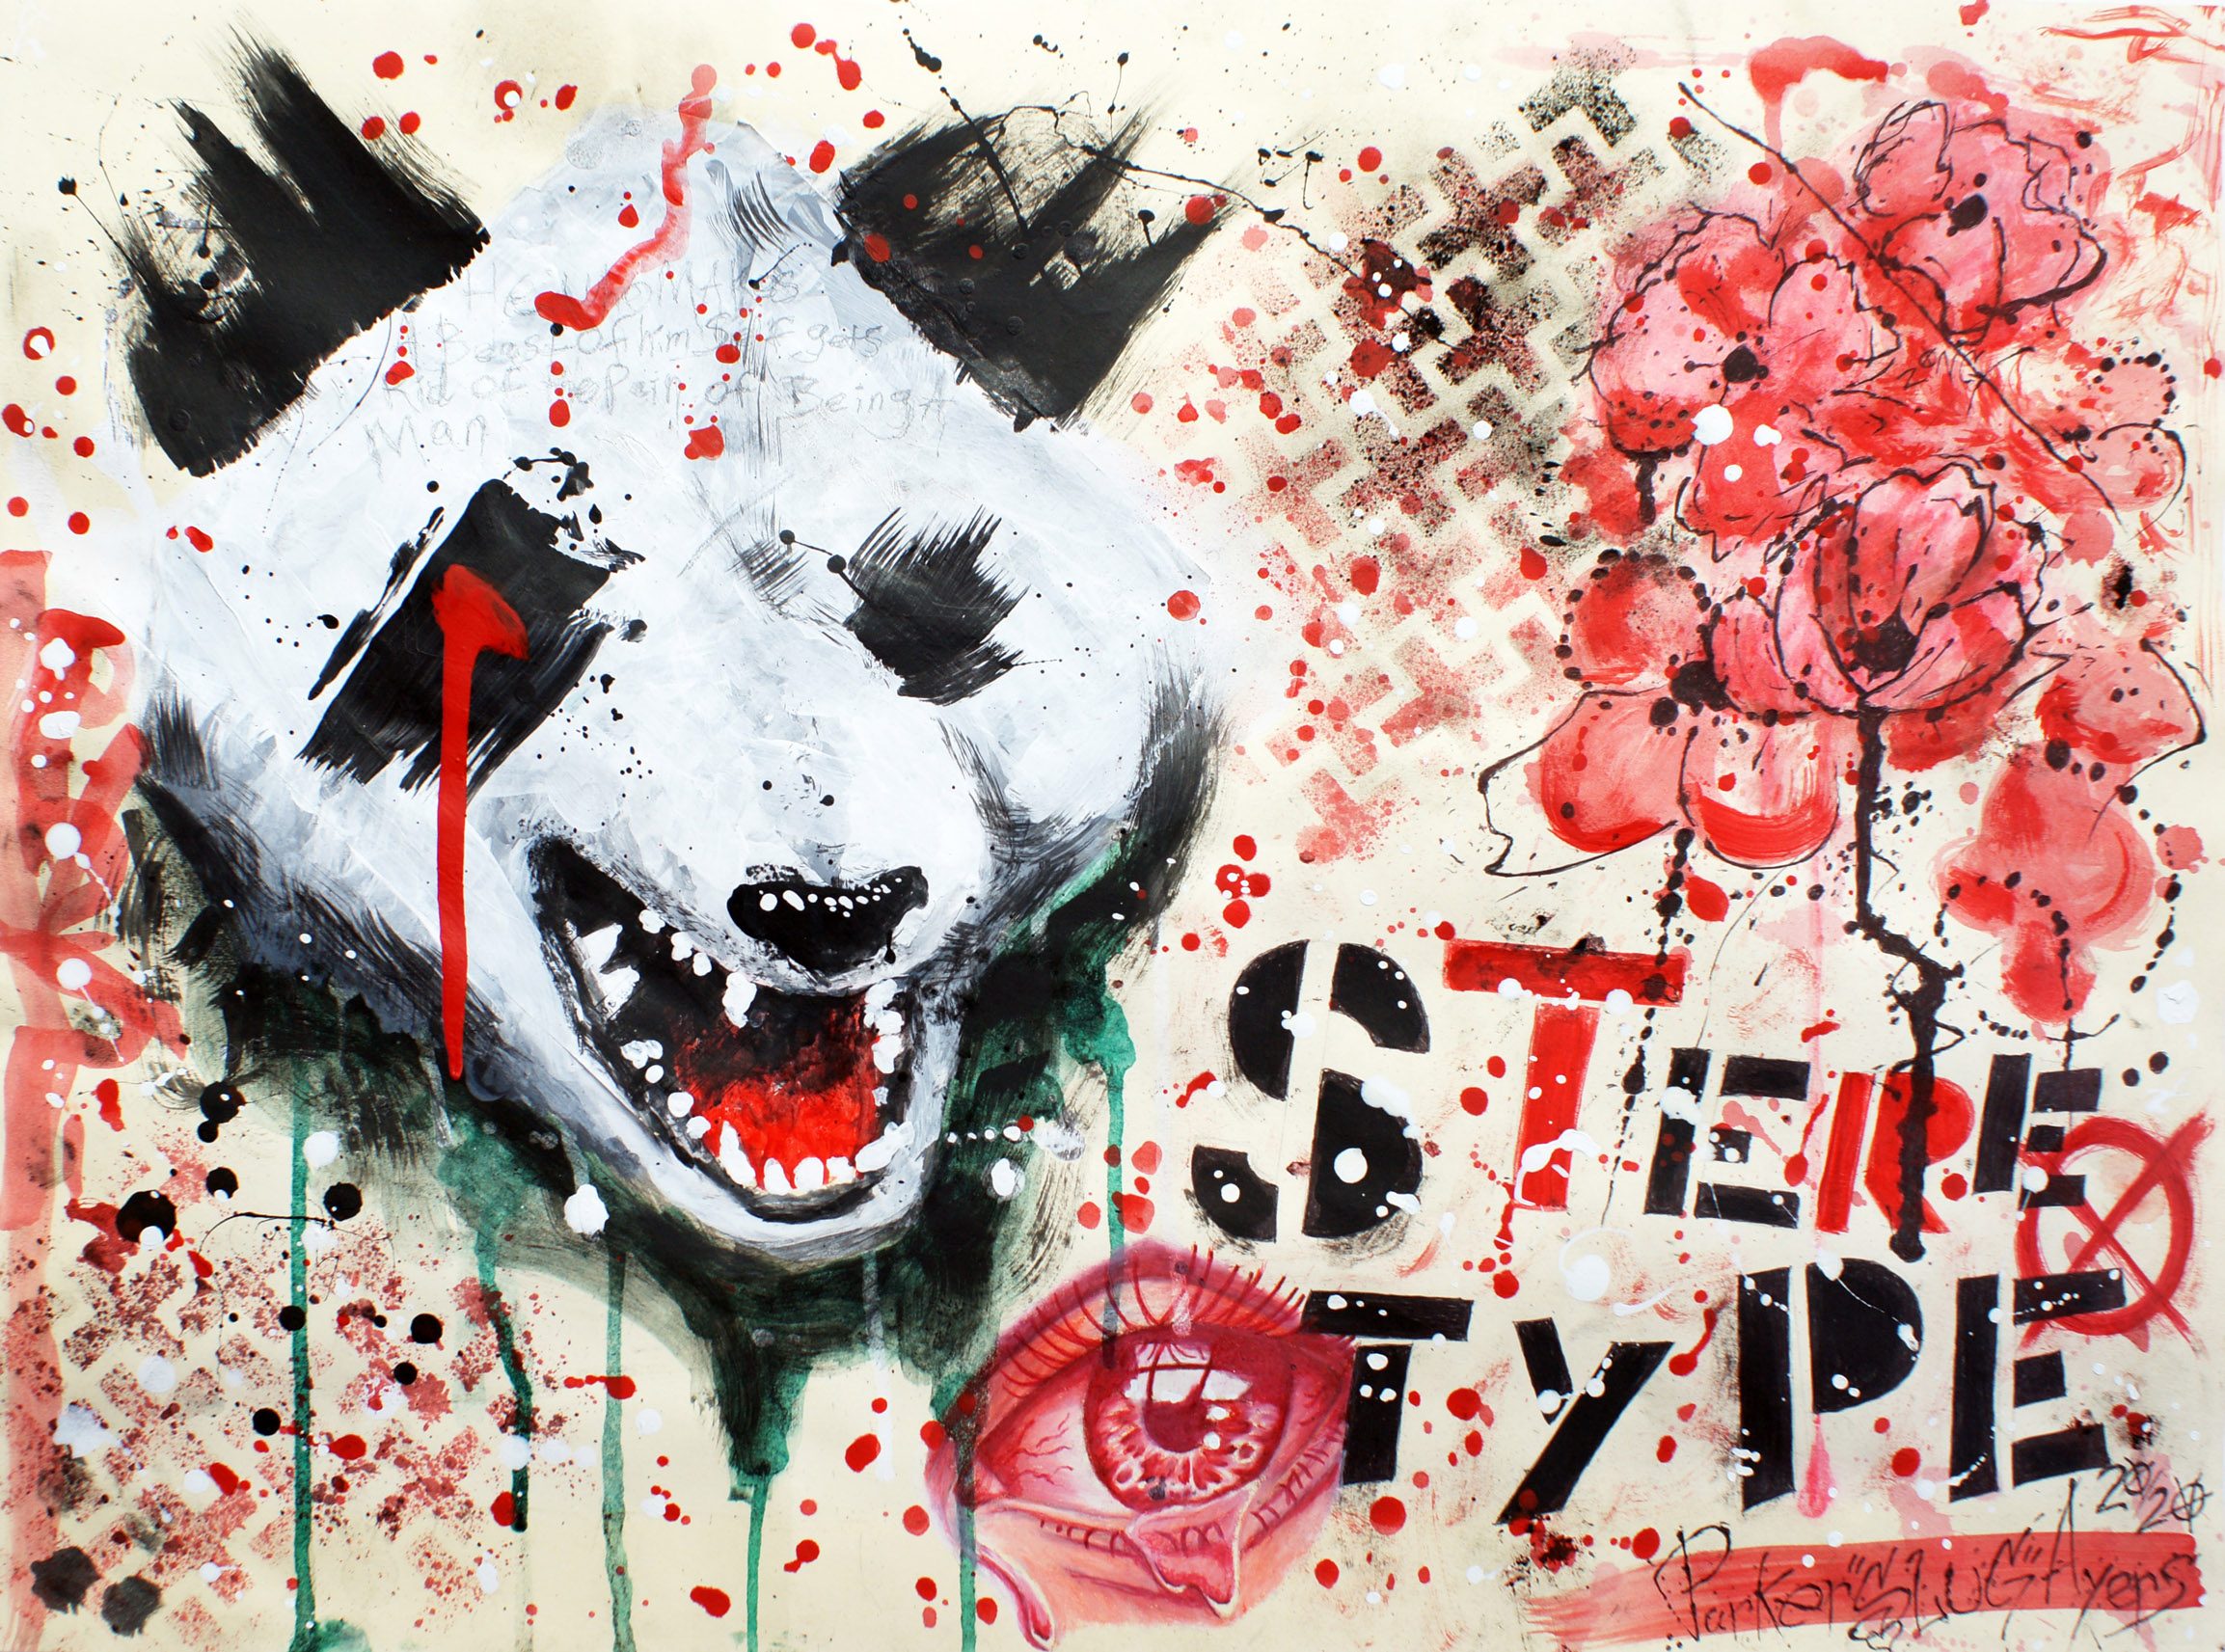 painting of panda bear with bleeding eye and background of graffiti flowers and the word "stereotype"